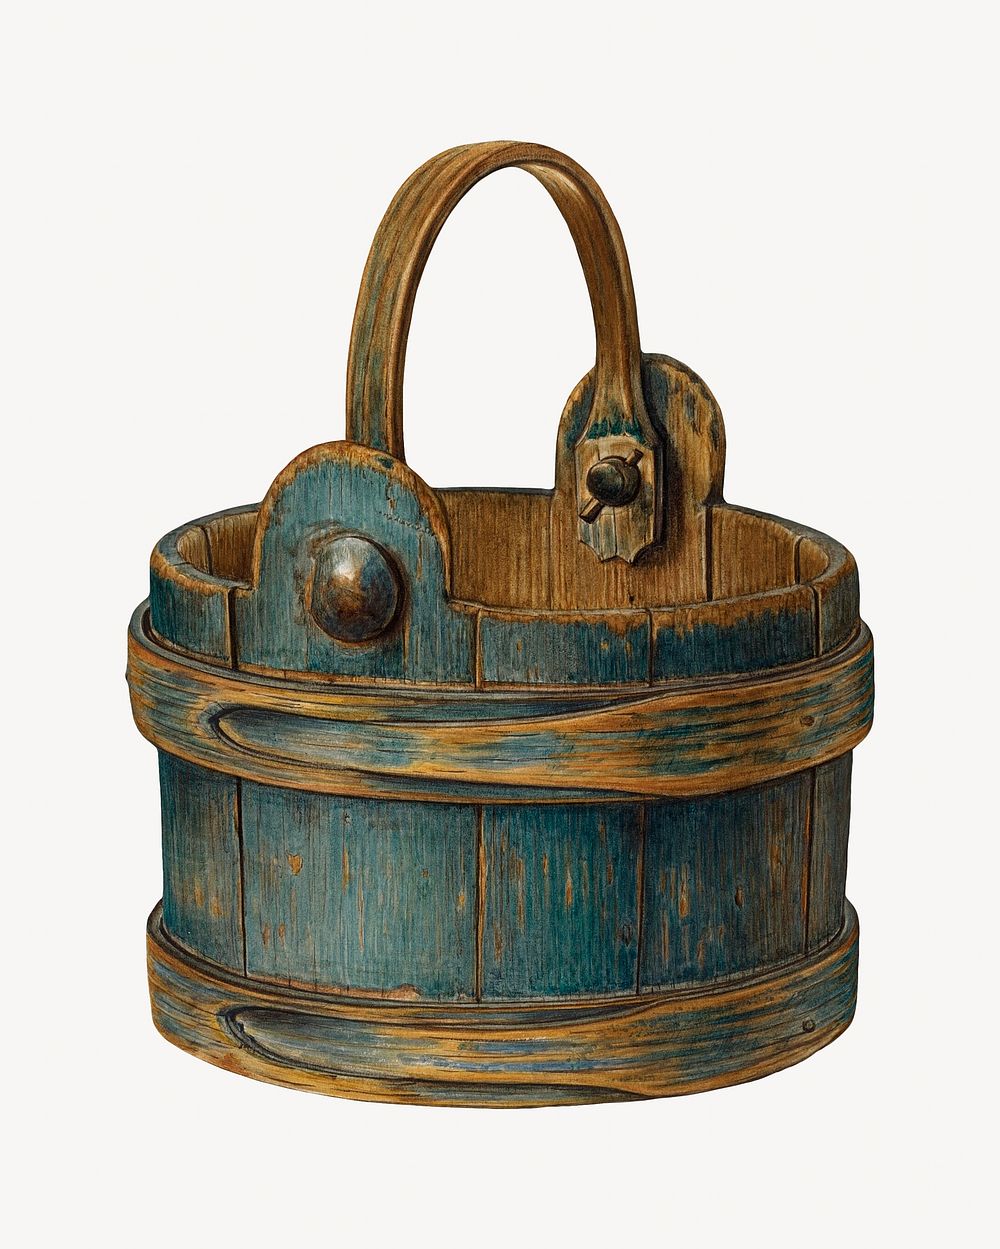 Vintage wooden bucket, vintage illustration. Remixed by rawpixel.